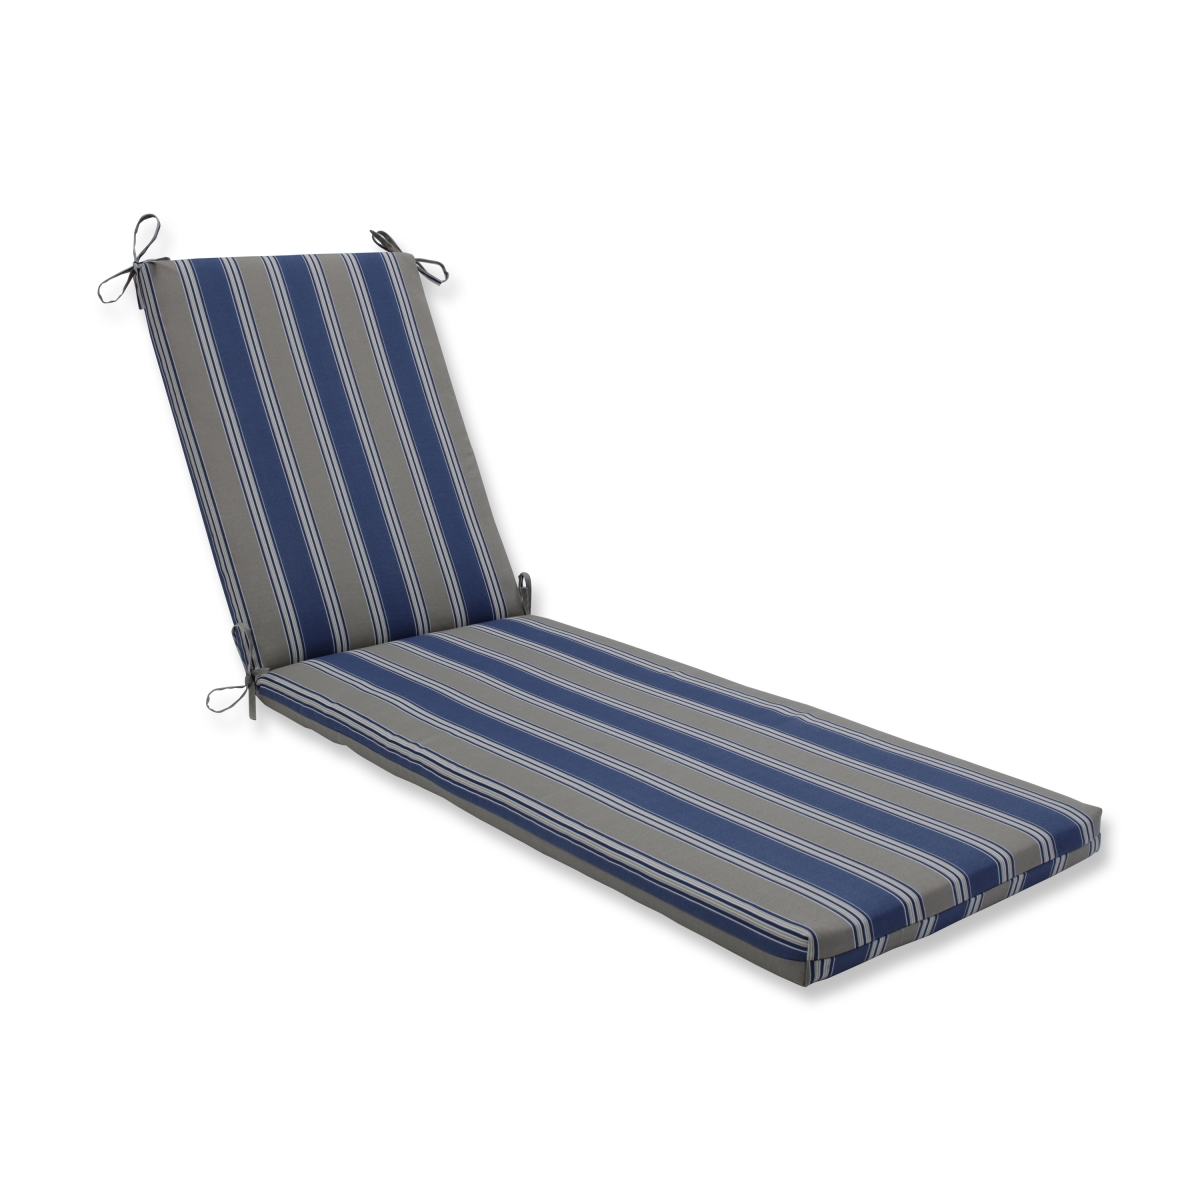 80 X 23 X 3 In. Outdoor & Indoor Hamilton Cadet Chaise Lounge Cushion, Blue